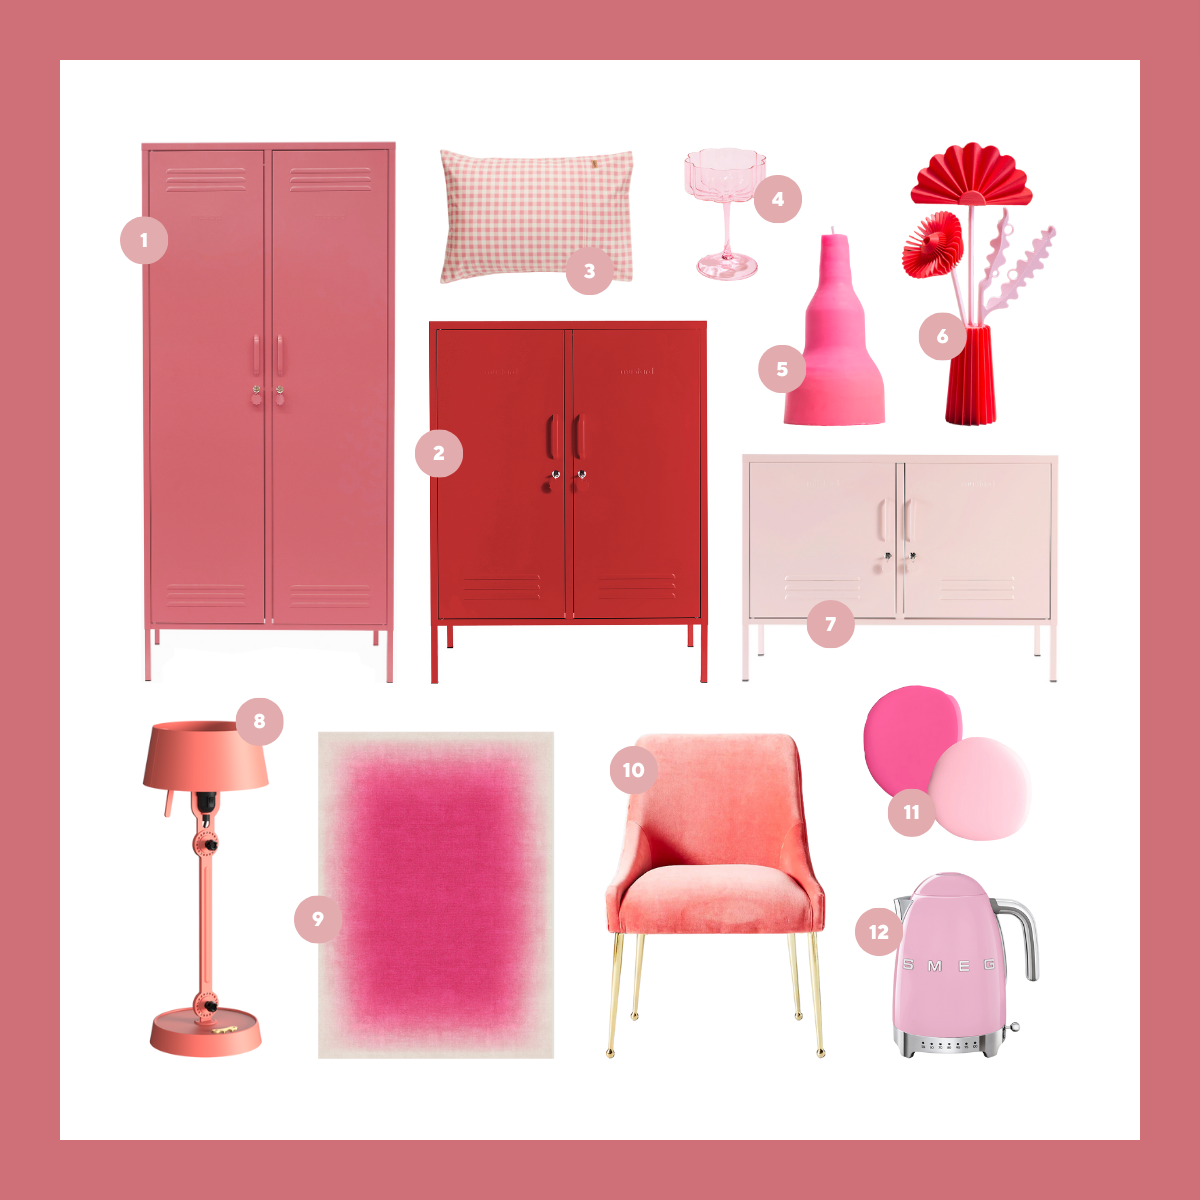 A moodboard featuring a range of pink homewares including a rug, lamp, vase and chair.